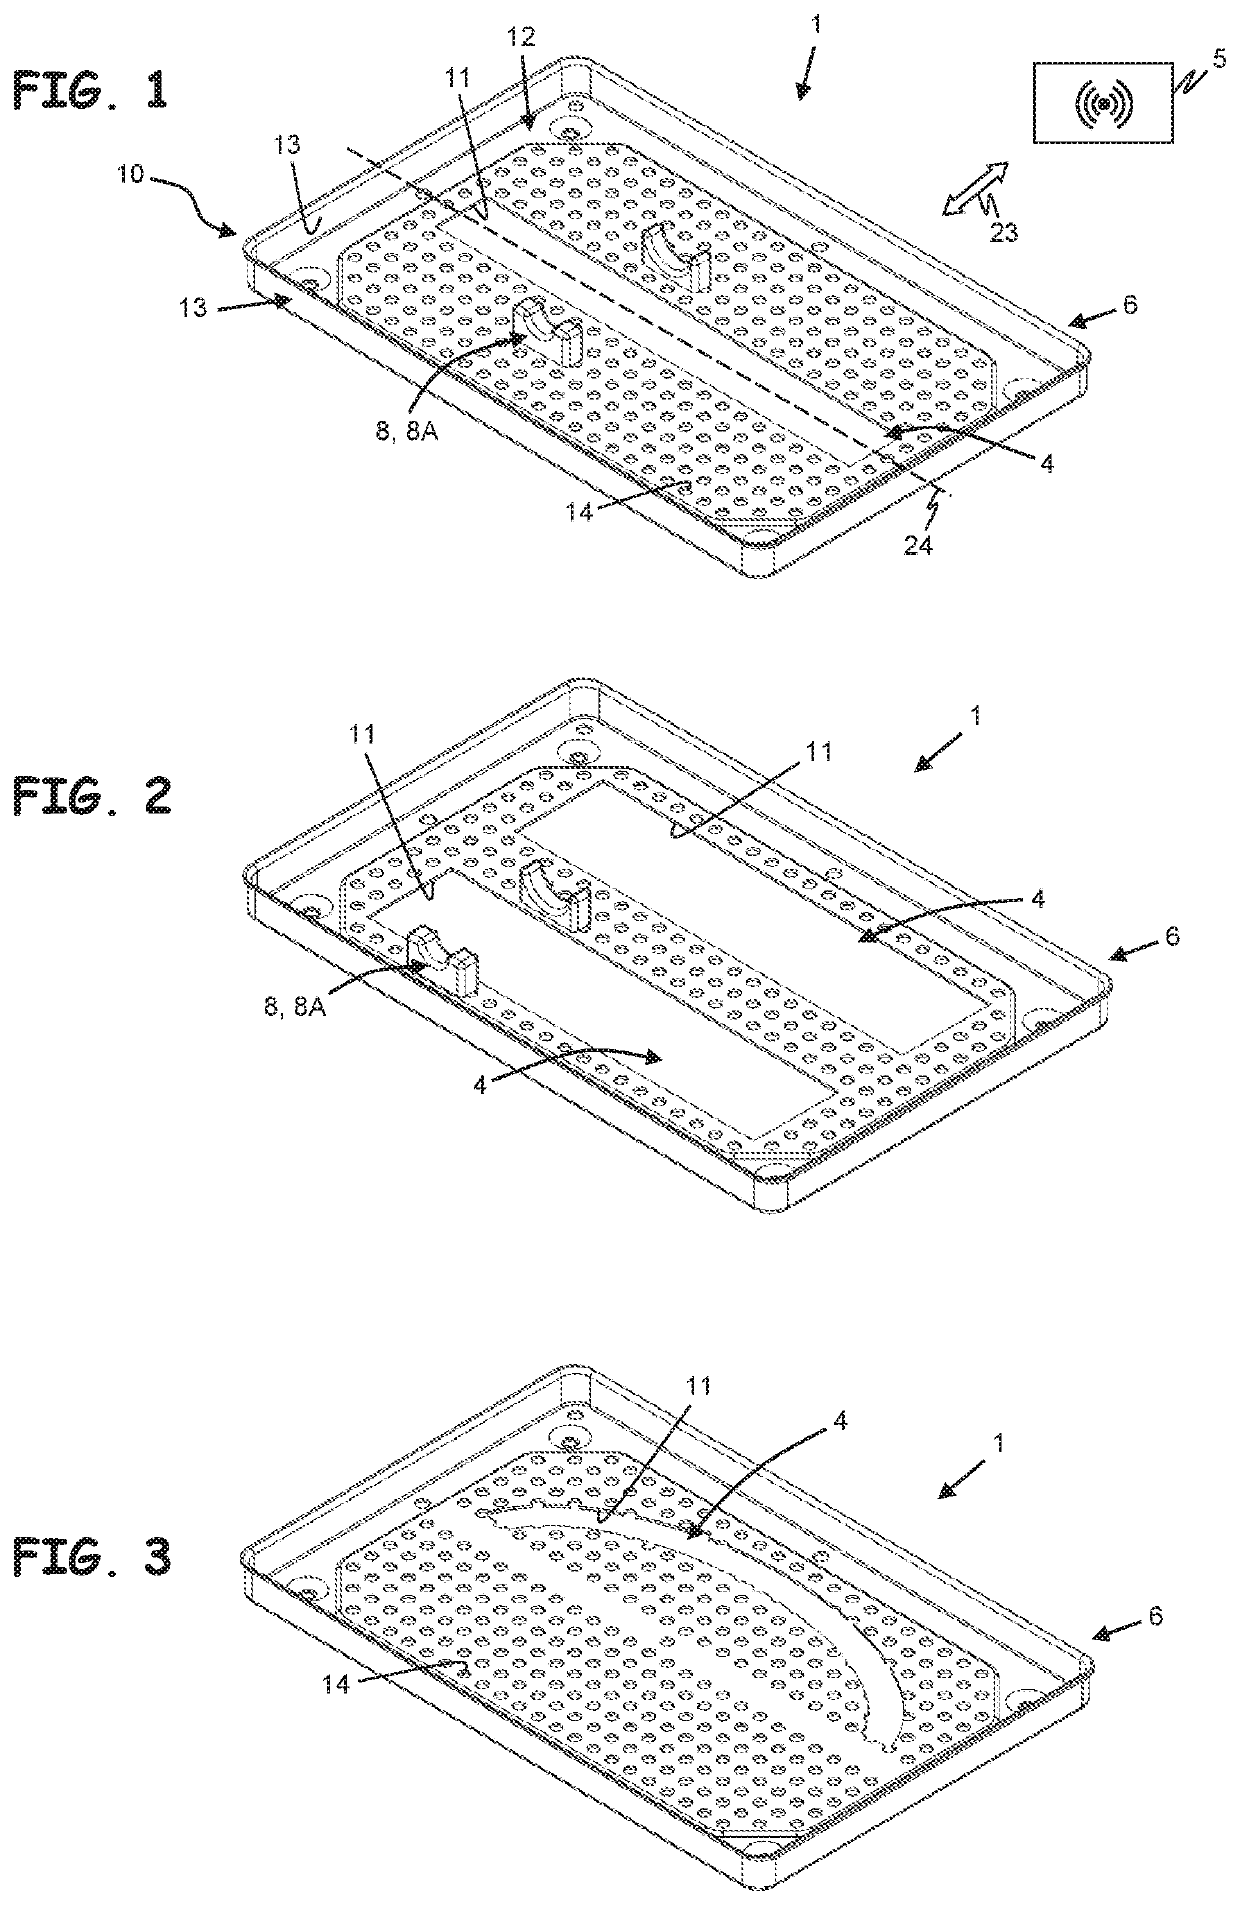 Carrier element for supporting at least one medical or dental instrument in a cleaning or care device